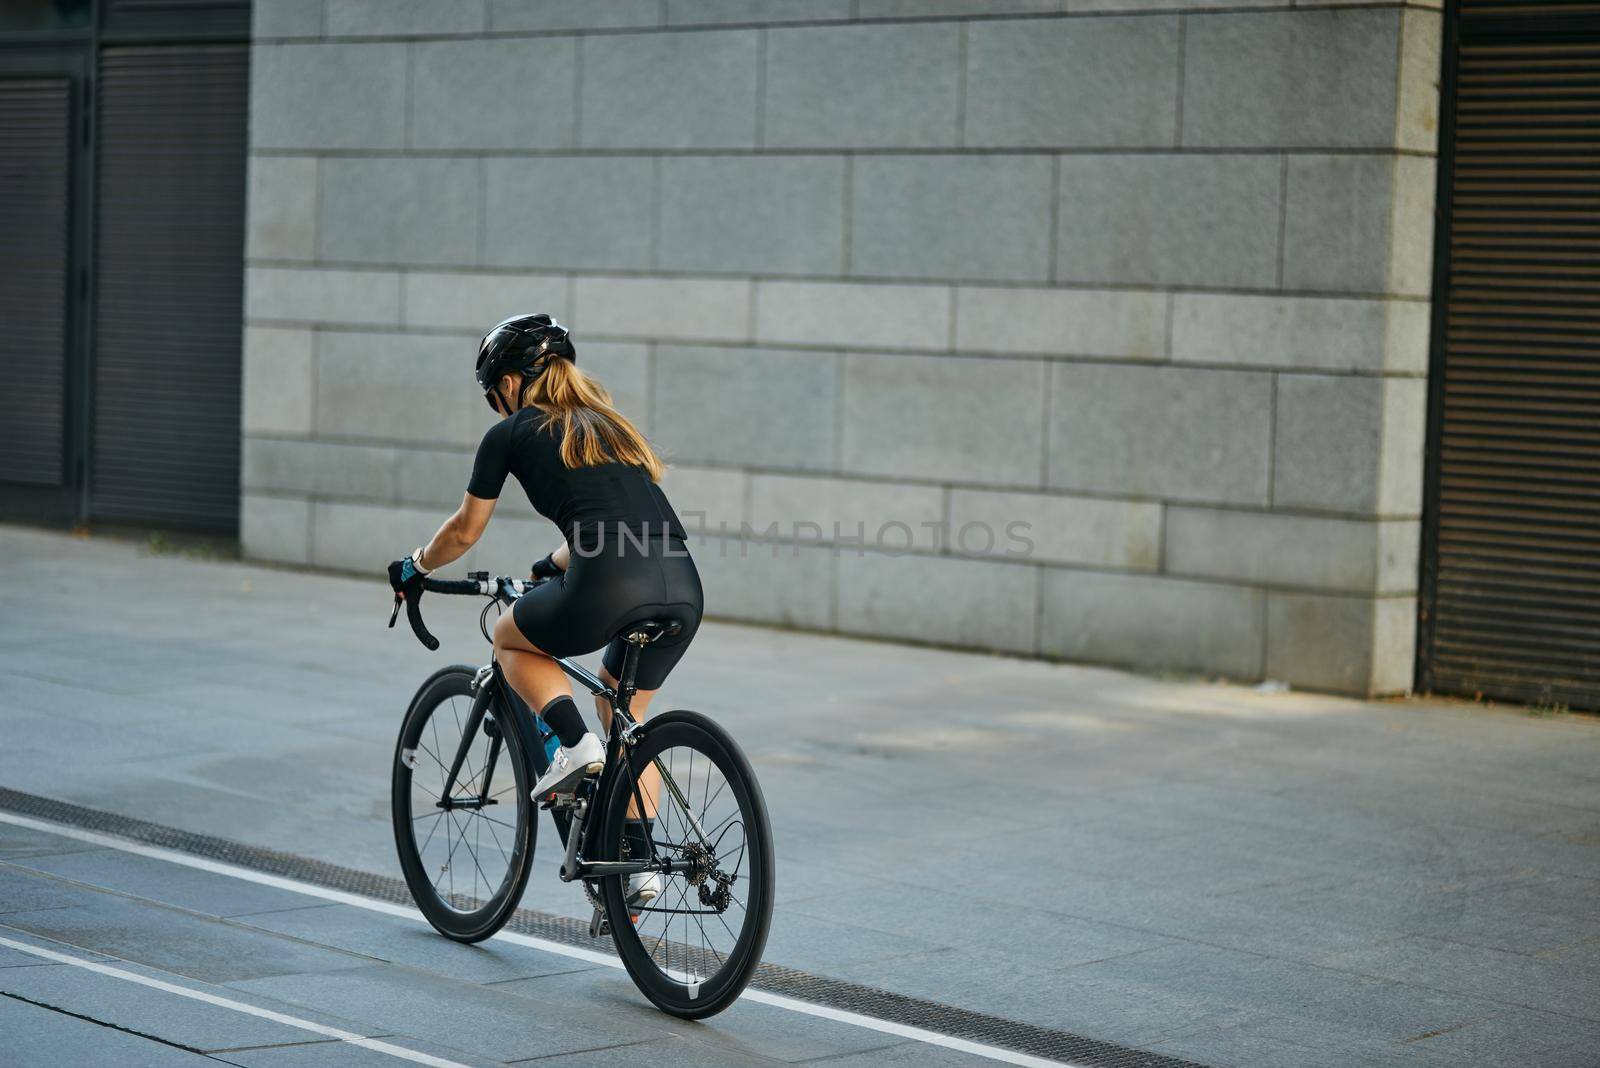 Rear view of professional female cyclist in black cycling garment and protective gear riding bicycle in city, passing buildings while training outdoors on a daytime. Urban lifestyle, sports concept